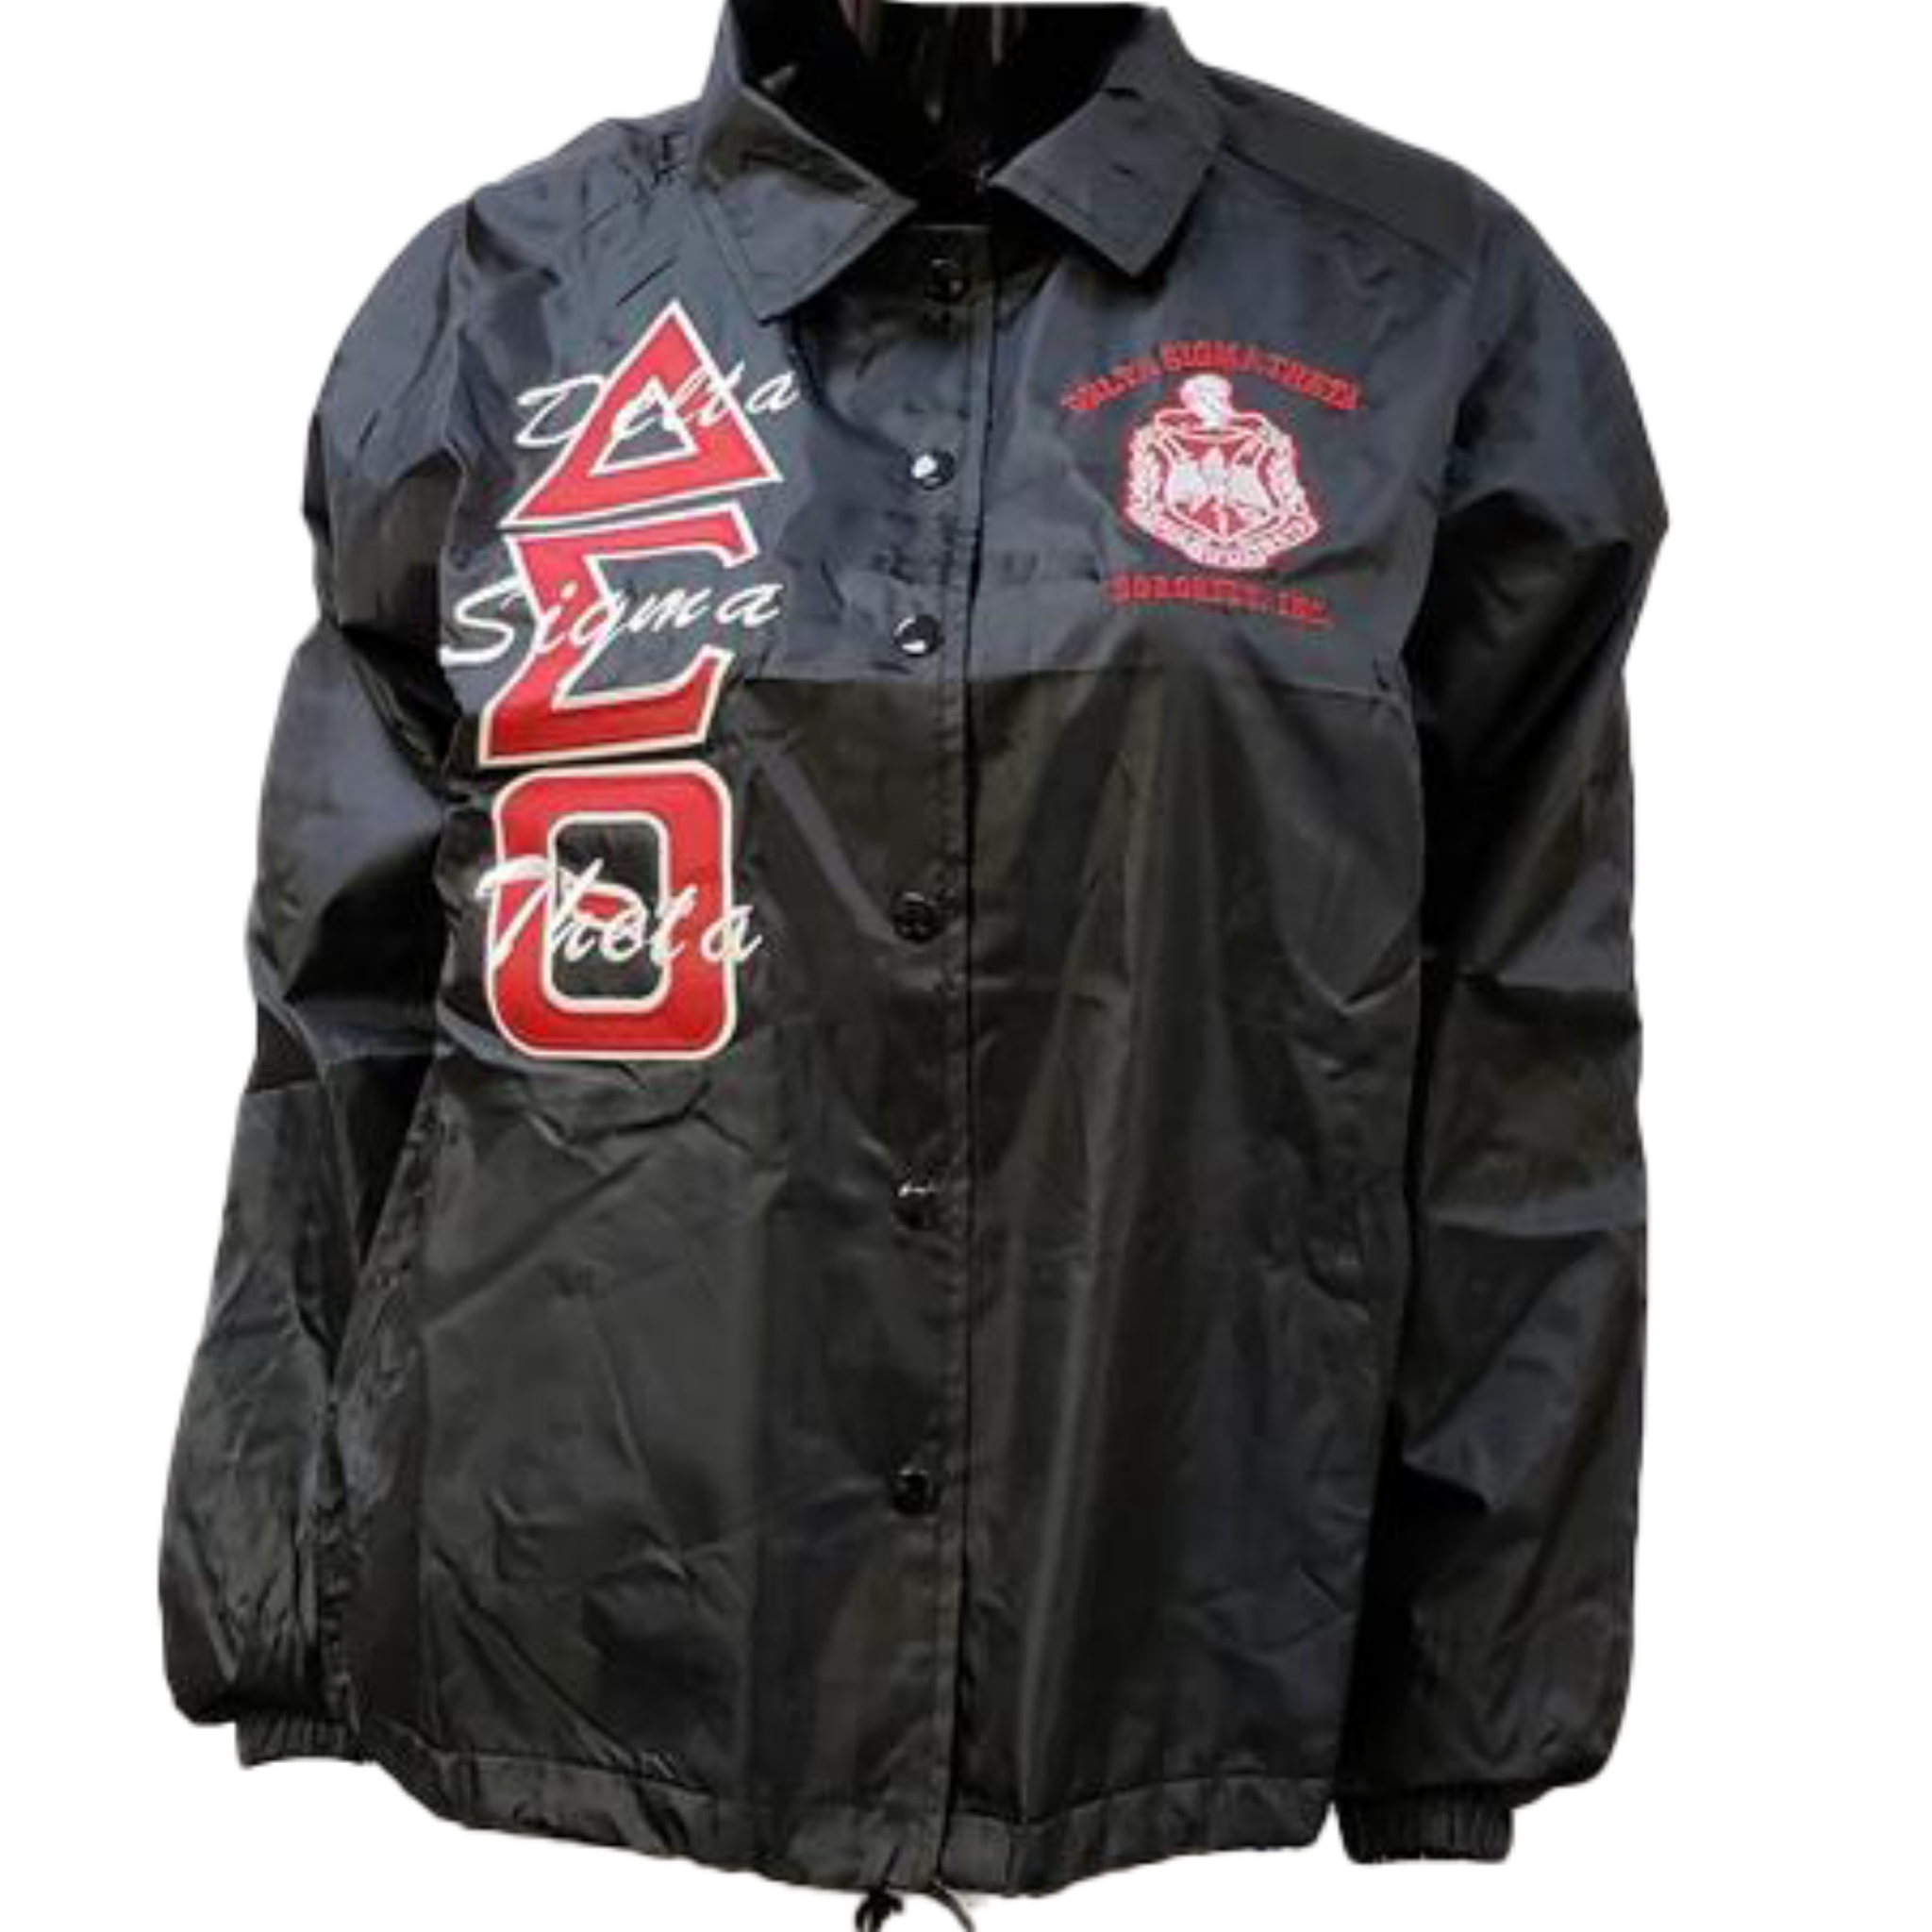 DF197 Custom Line Jacket (For Those Who Already Have The Jacket w/Greek Letters) - Black